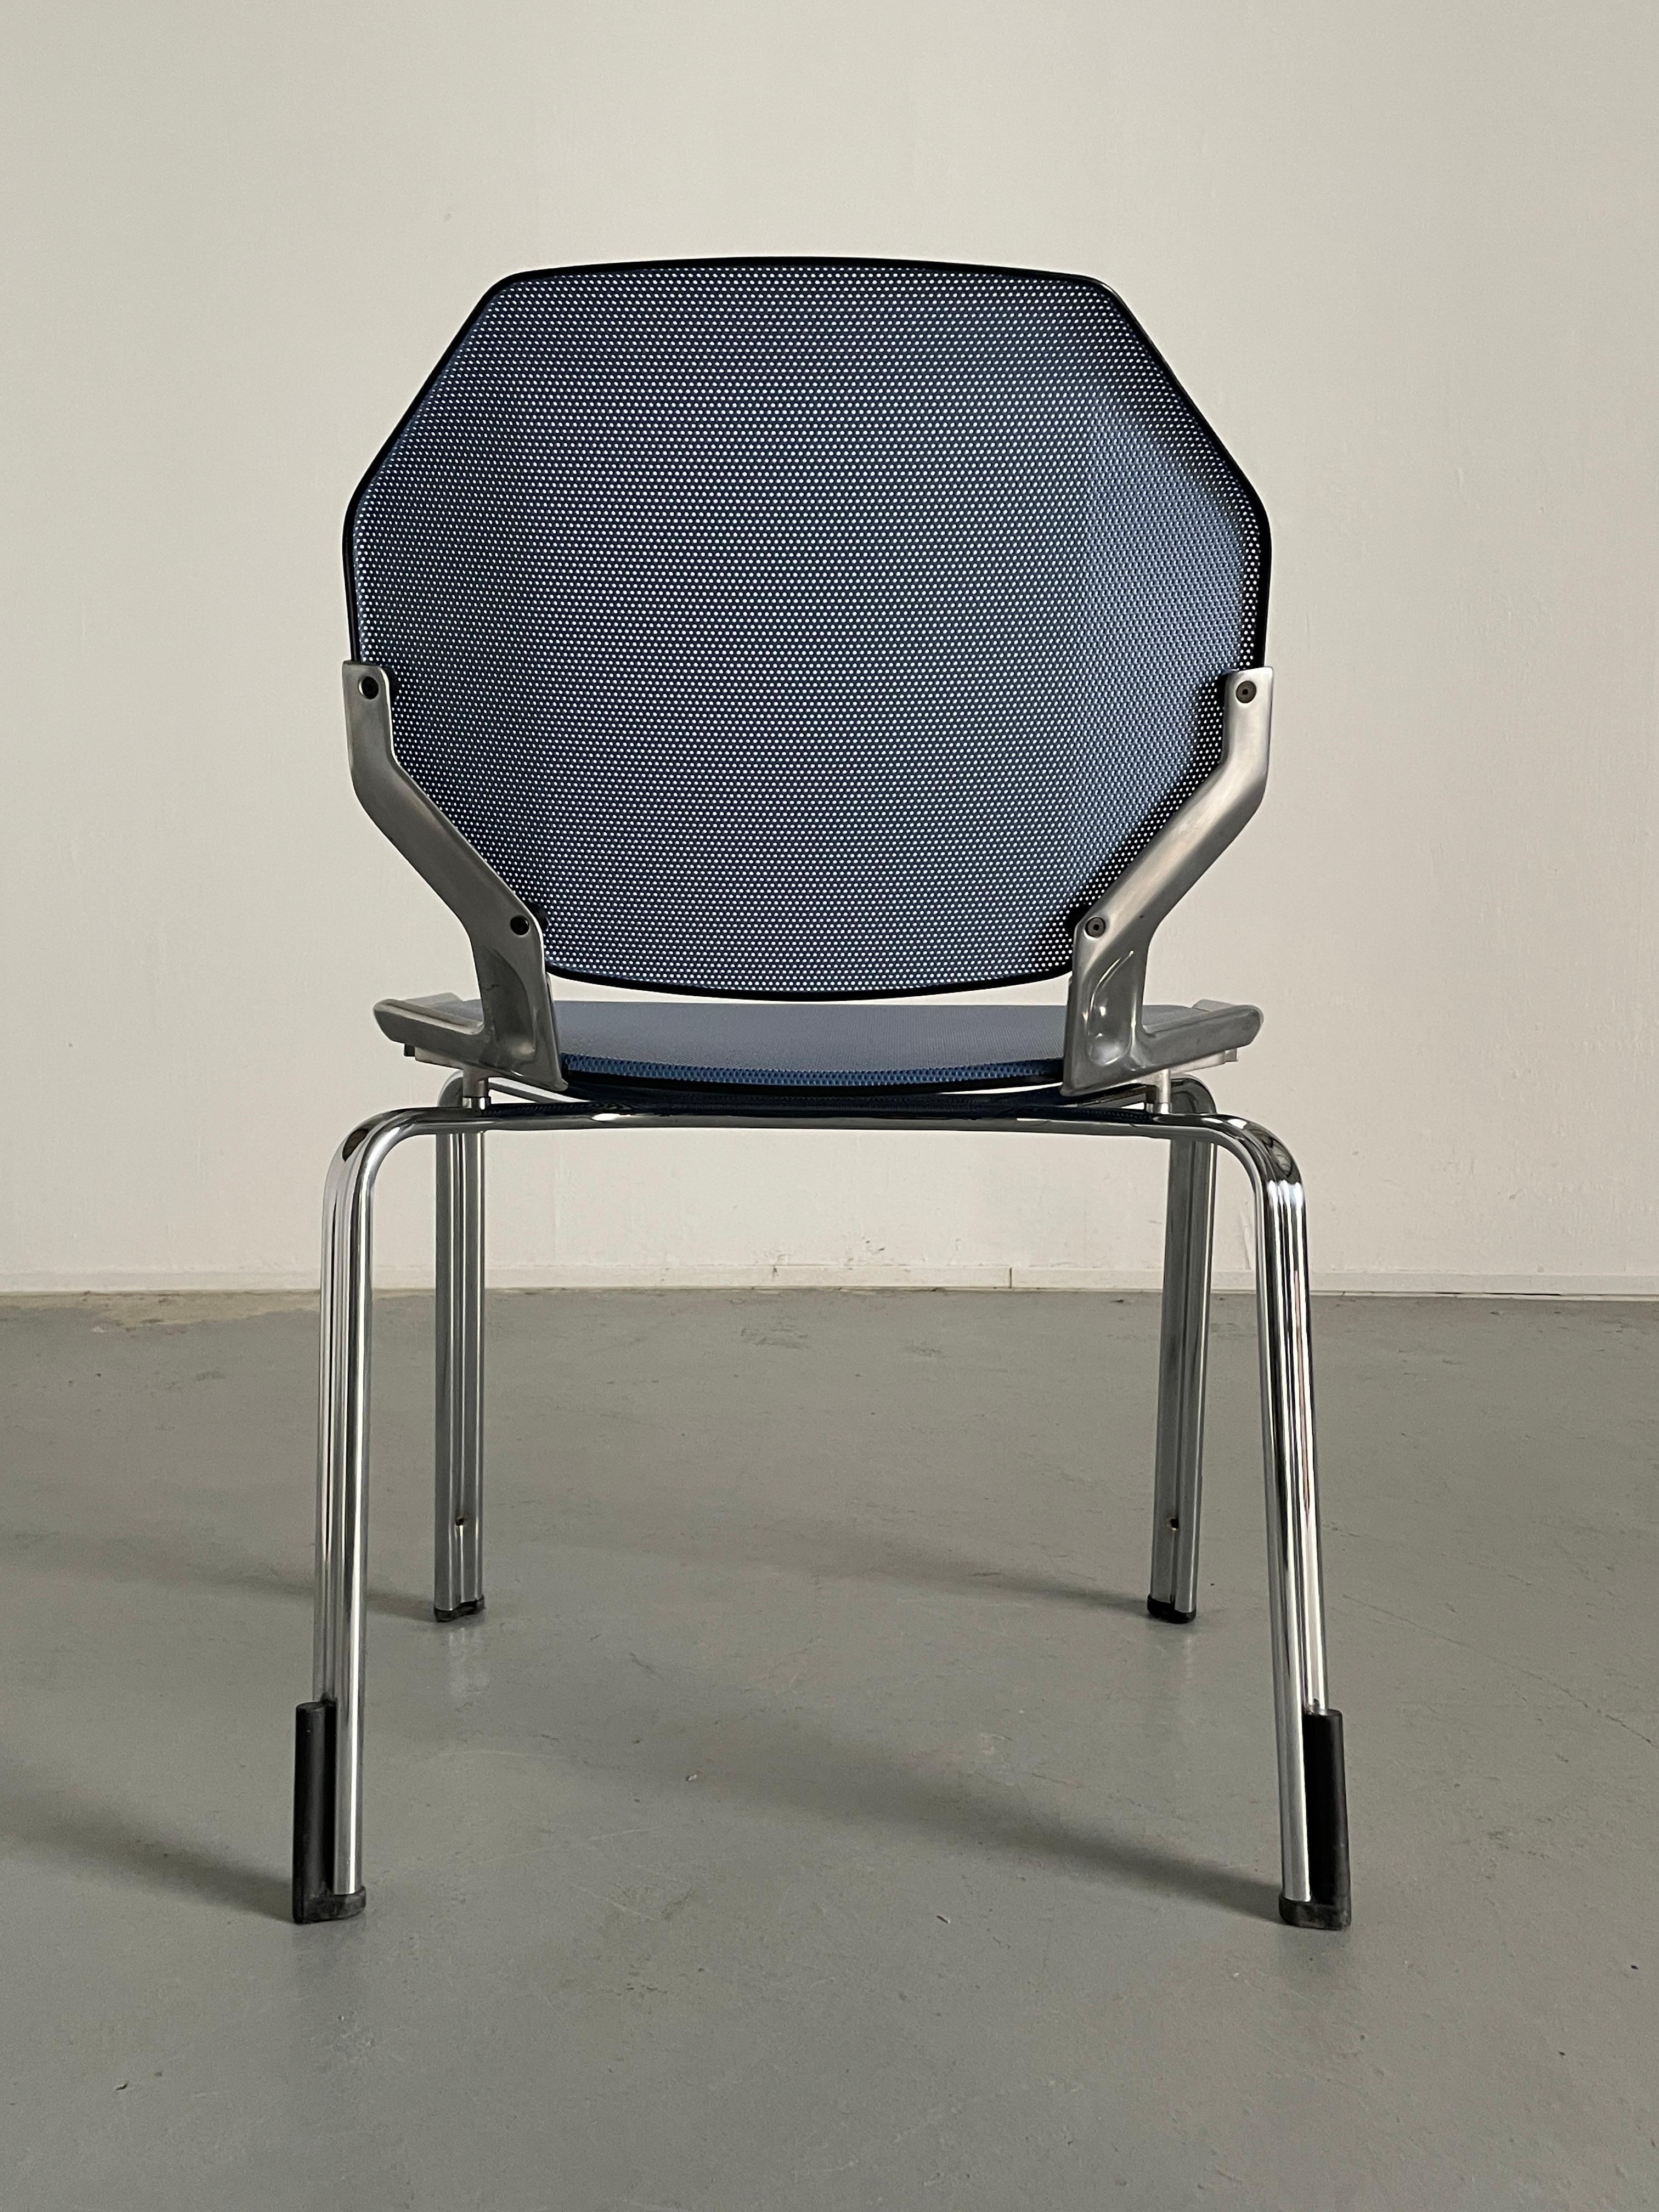 Space Age Futuristic Octagonal Stackable Dining Chairs by Fröscher Sitform, 90s For Sale 3